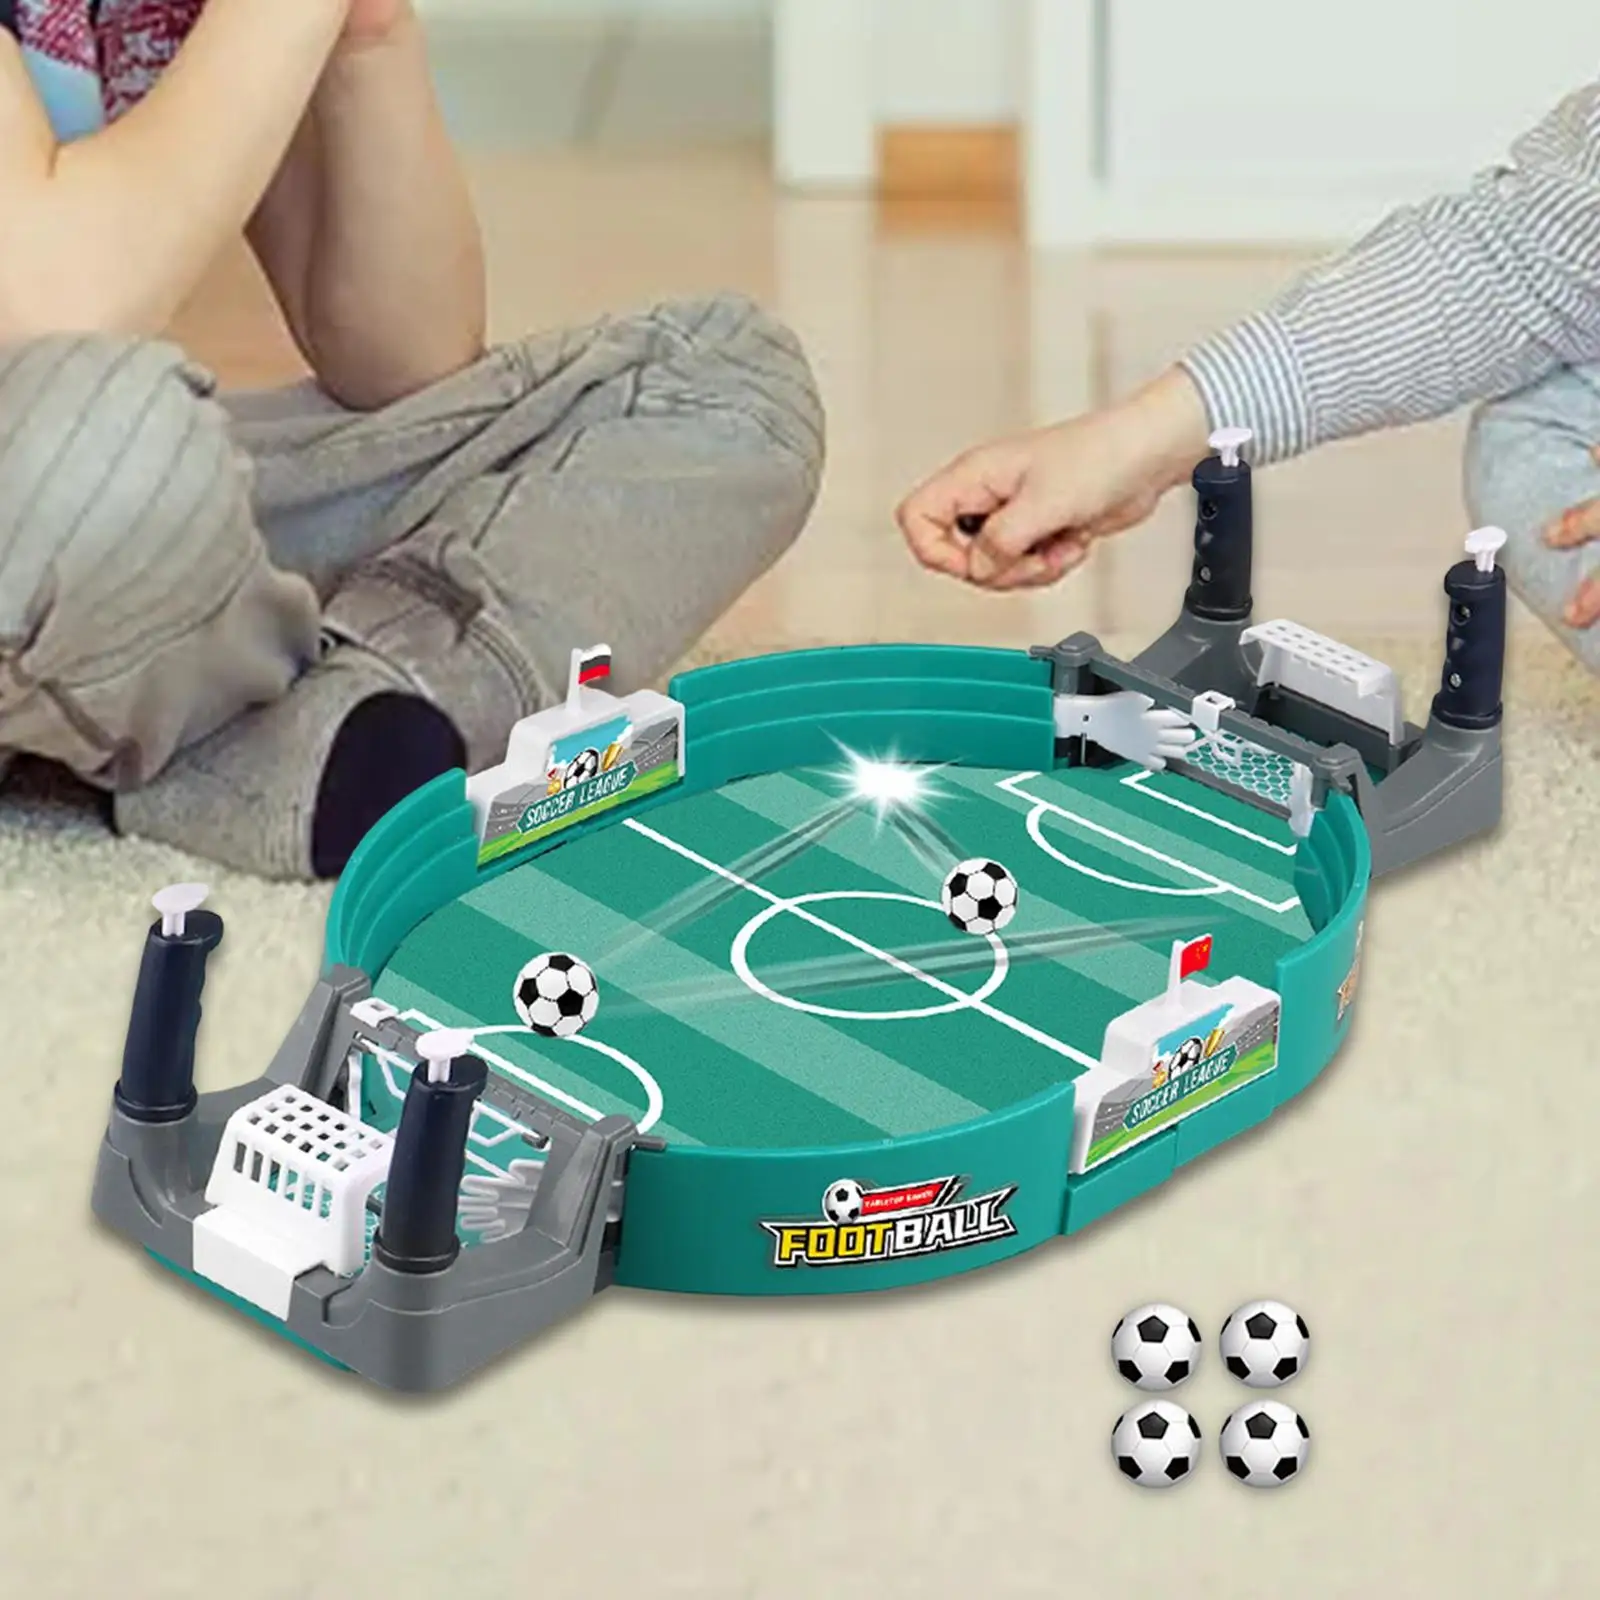 Soccer Football Games Interactive Toy Pinball for Children Adults All Ages